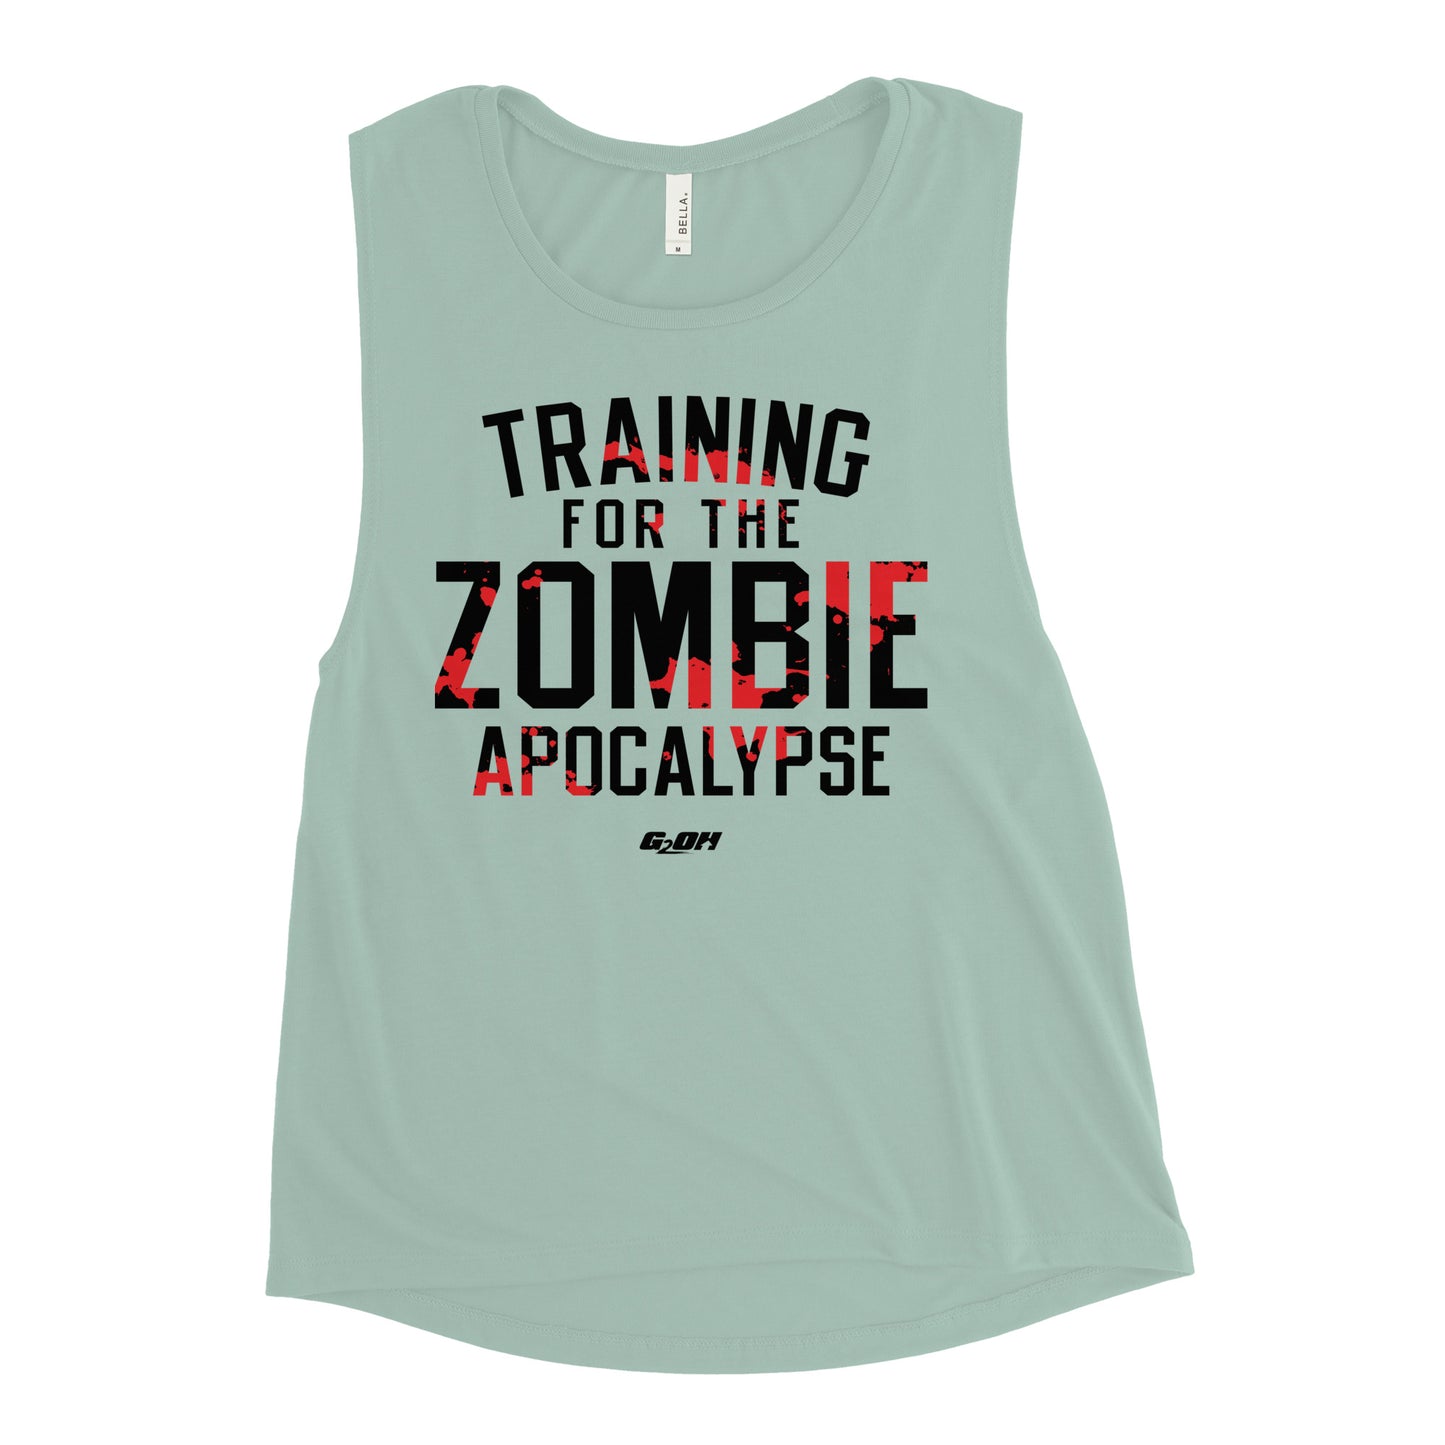 Training For The Zombie Apocalypse Women's Muscle Tank